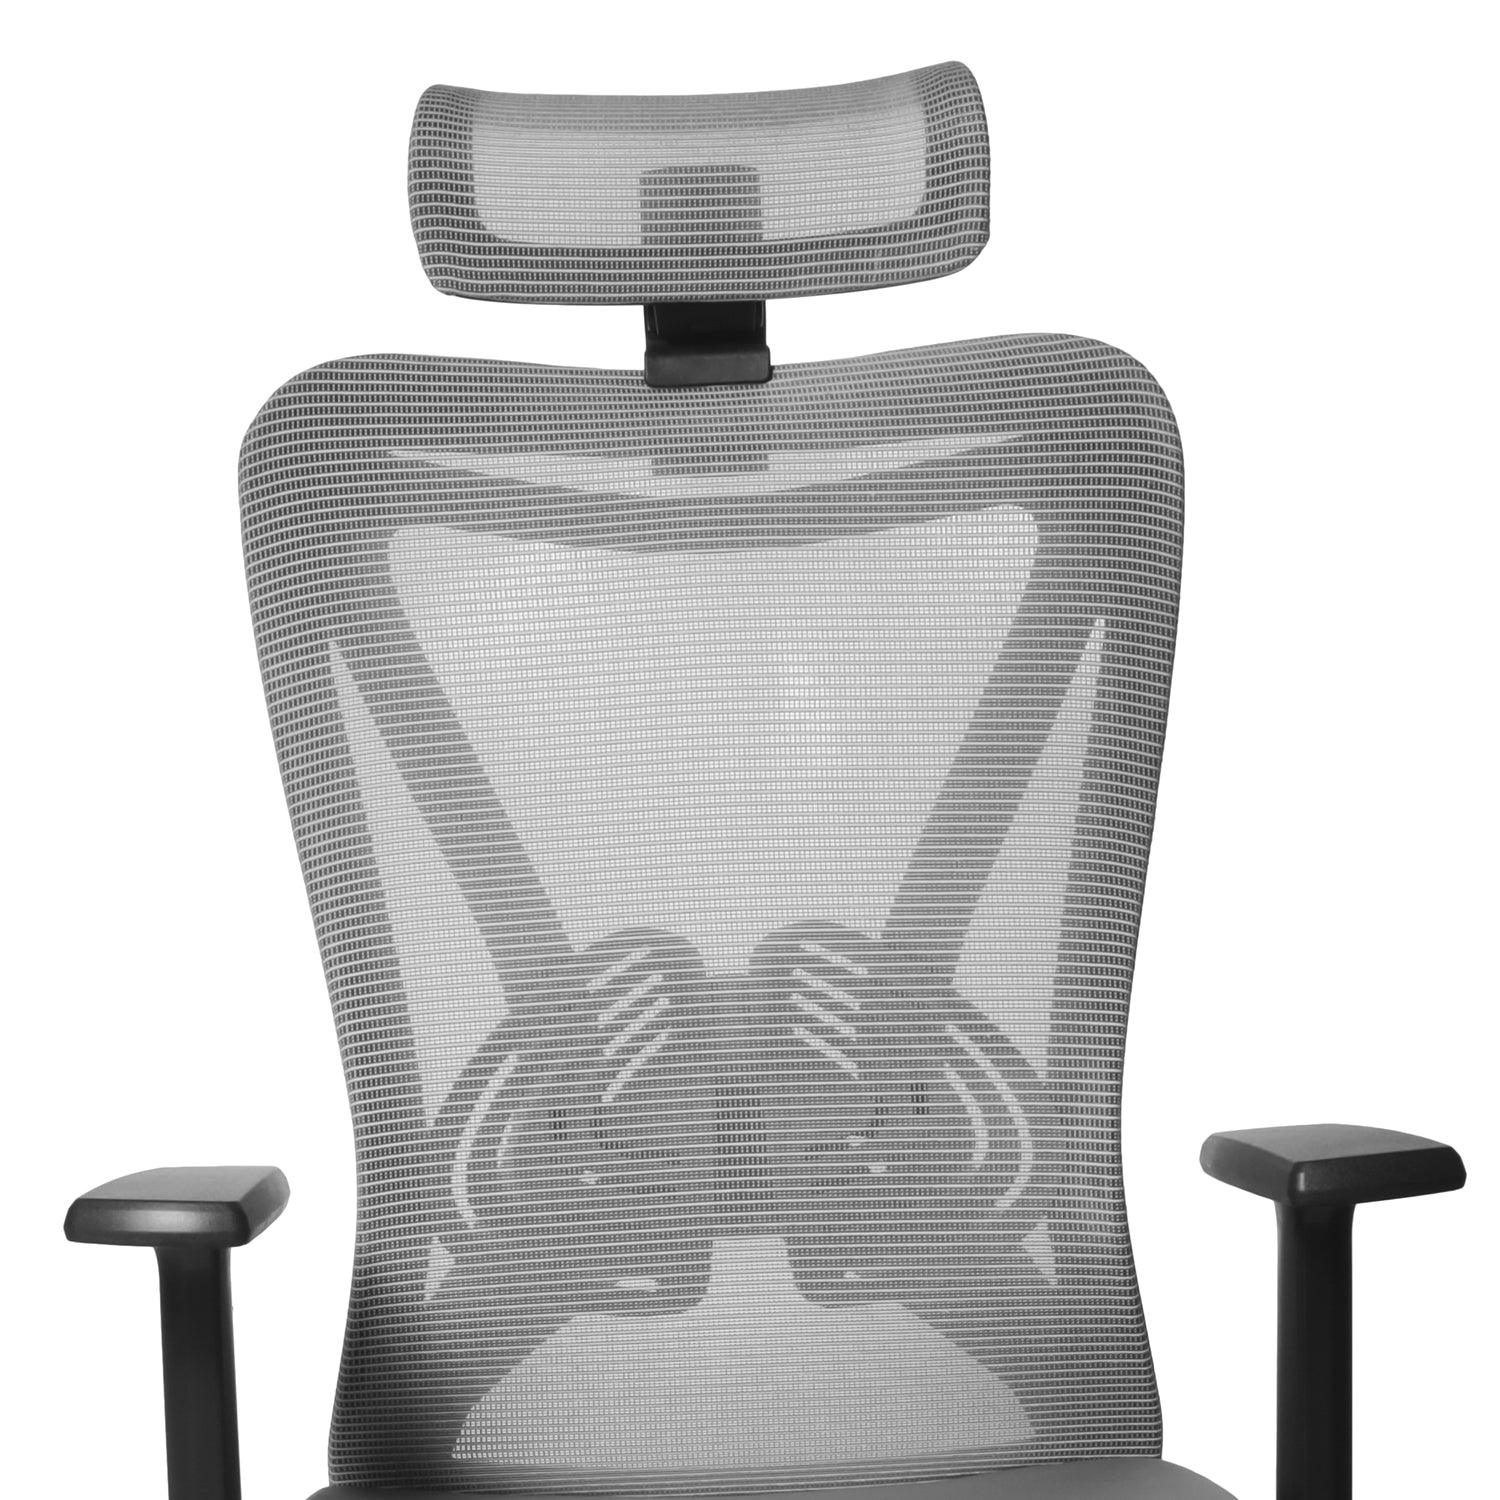 DrLuxur Helios Pro ™ Office/Gaming Chair- Perfect Solution For Back and Posture - DrLuxur